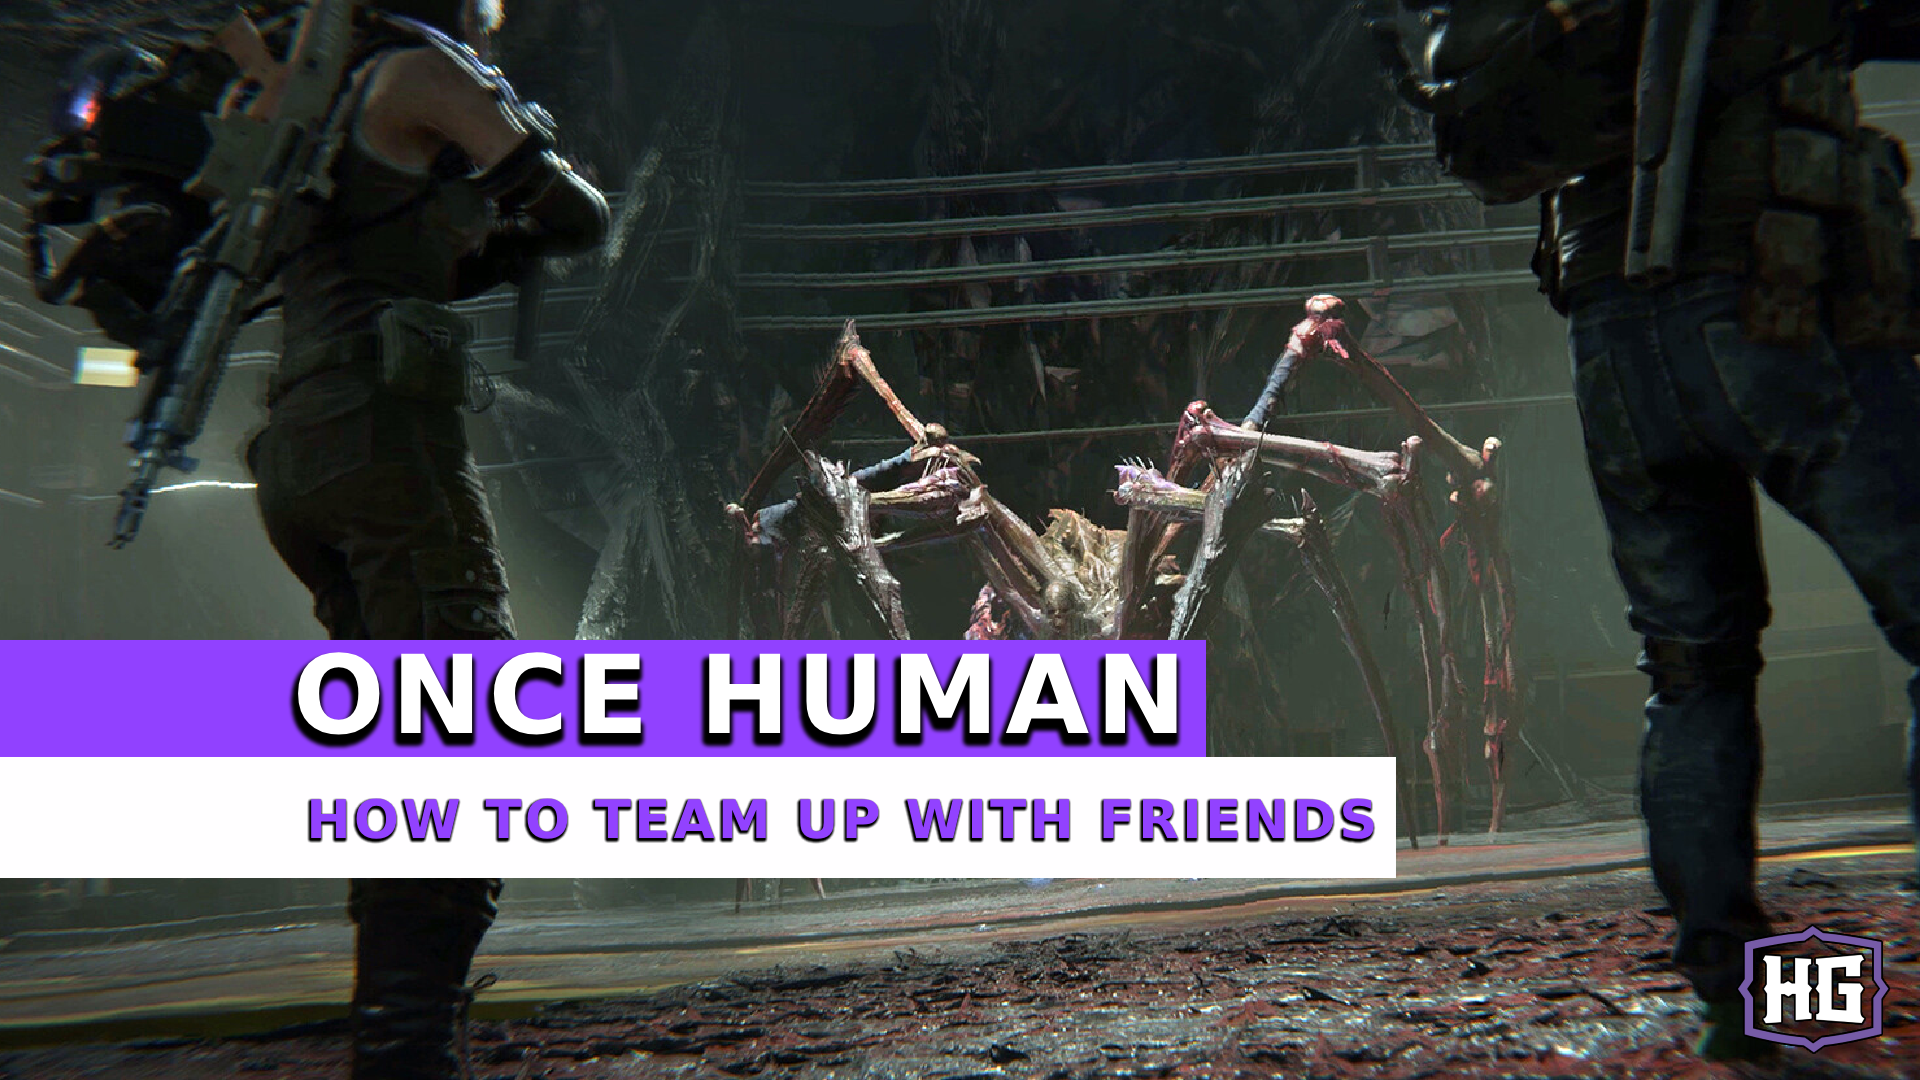 Once Human: How To Team Up With Friends